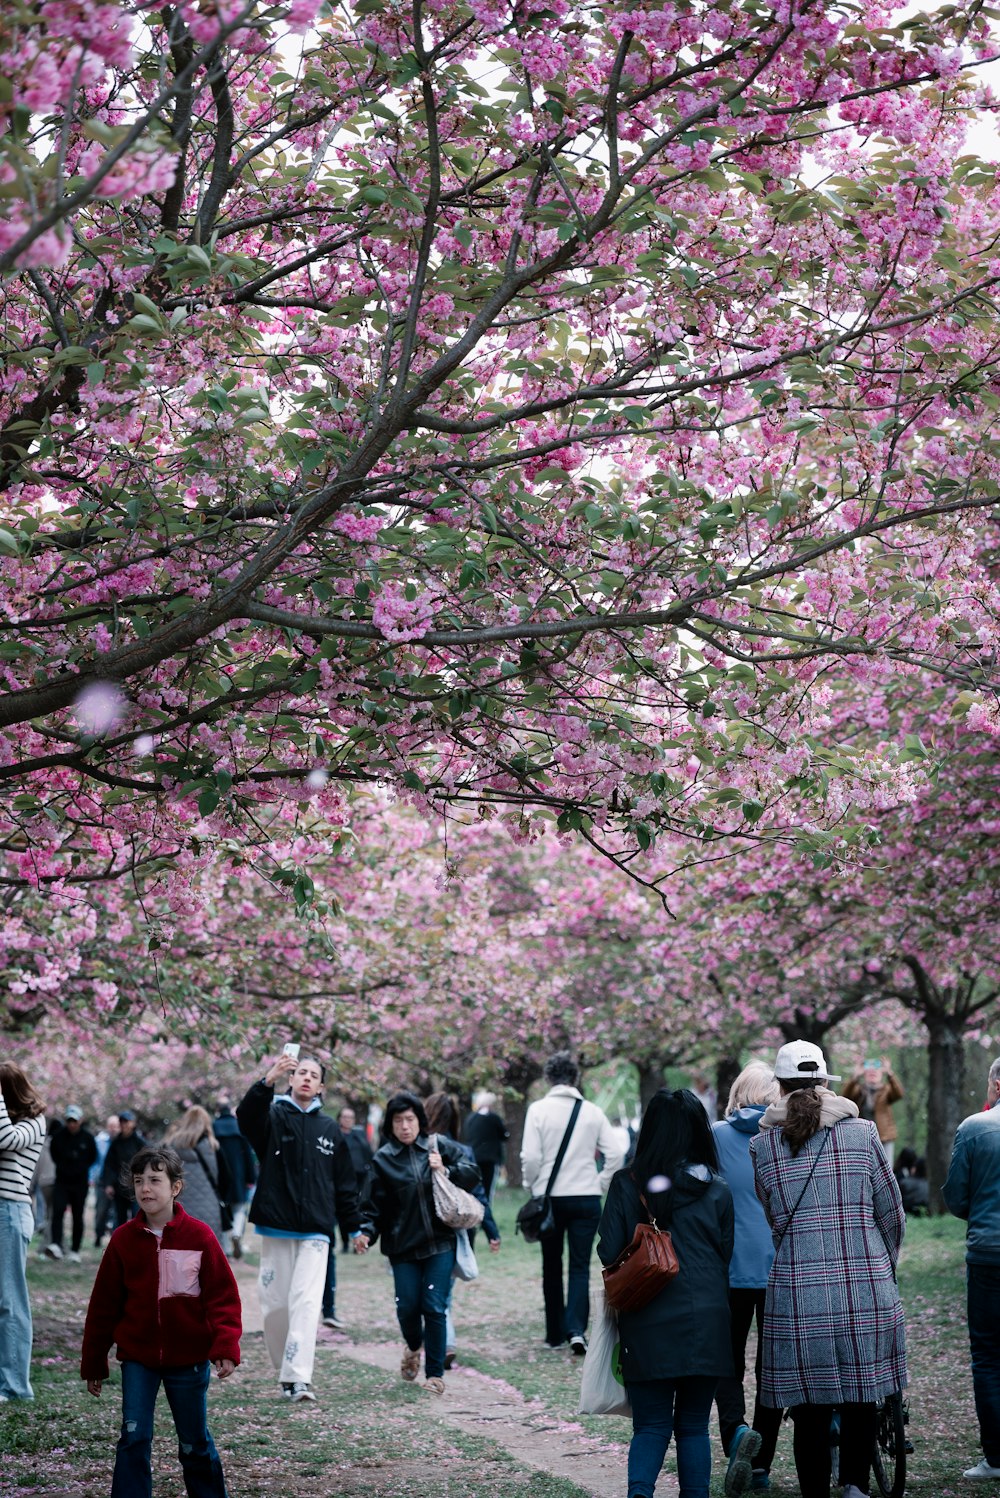 a group of people walking under a tree filled with pink flowers